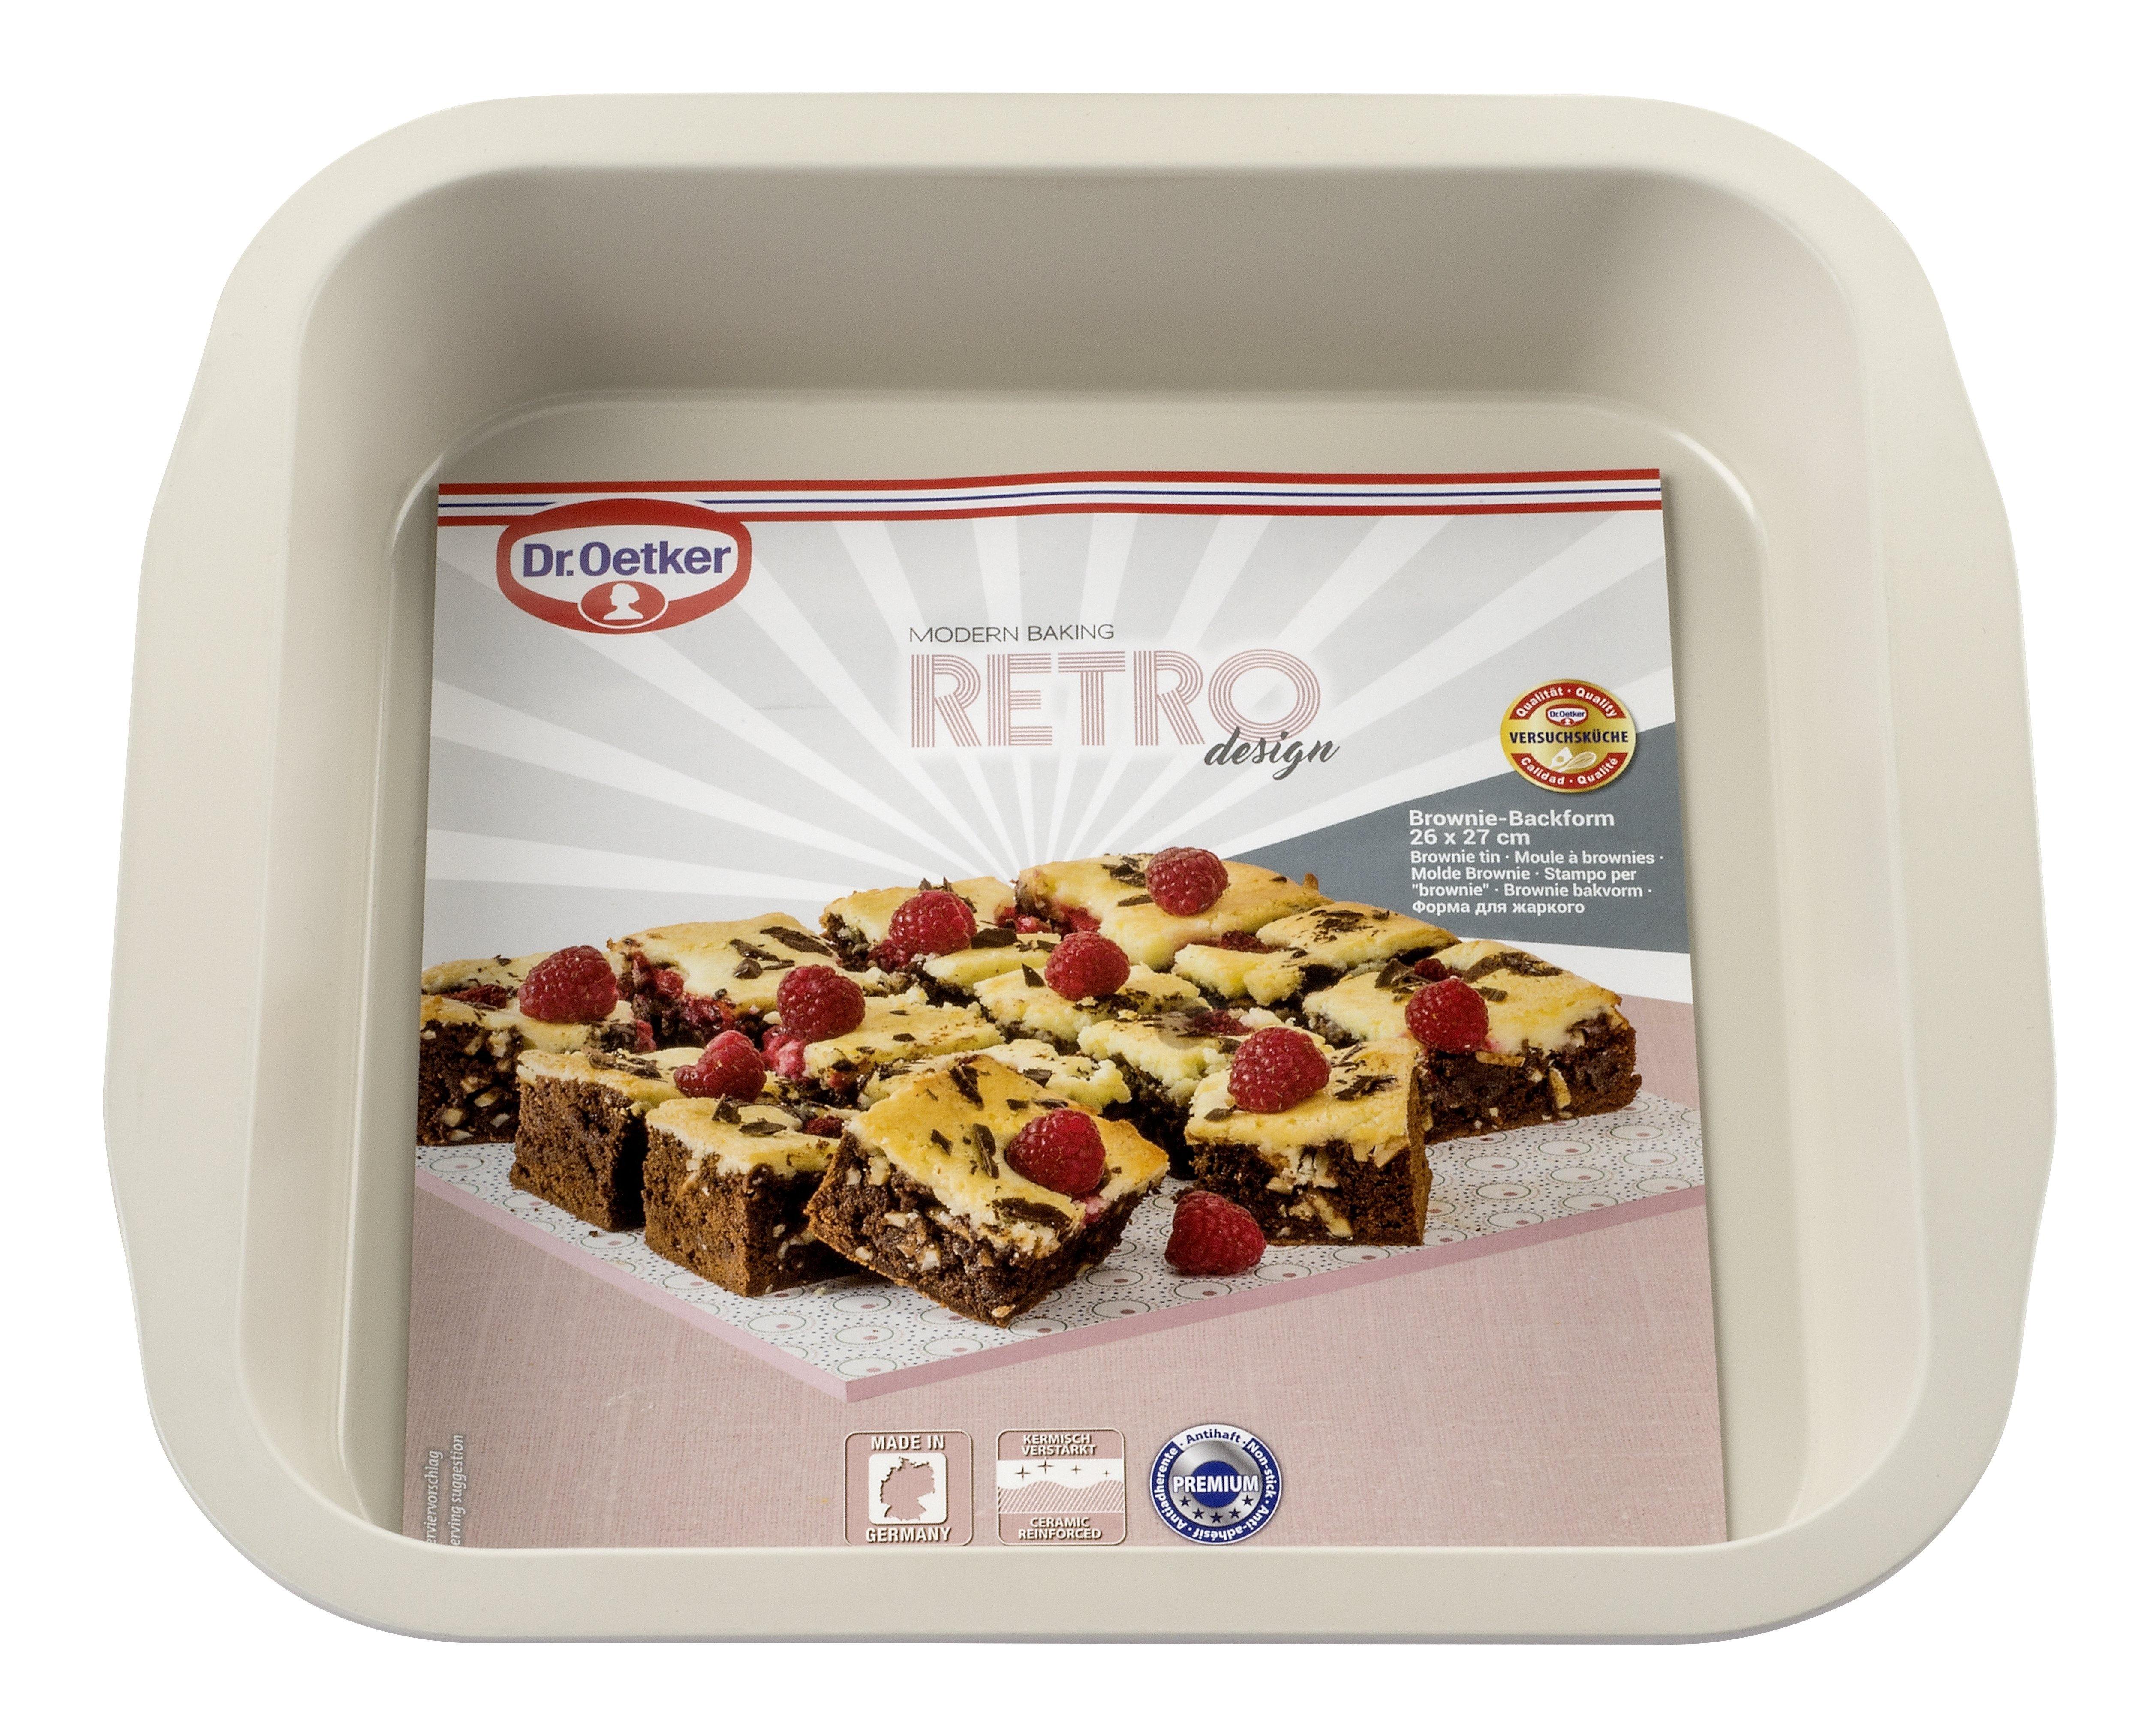 Dr. Oetker "Retro" Brownie Tin, Rose/CrÃ¨me, 28X26X5 Cm - Whole and All